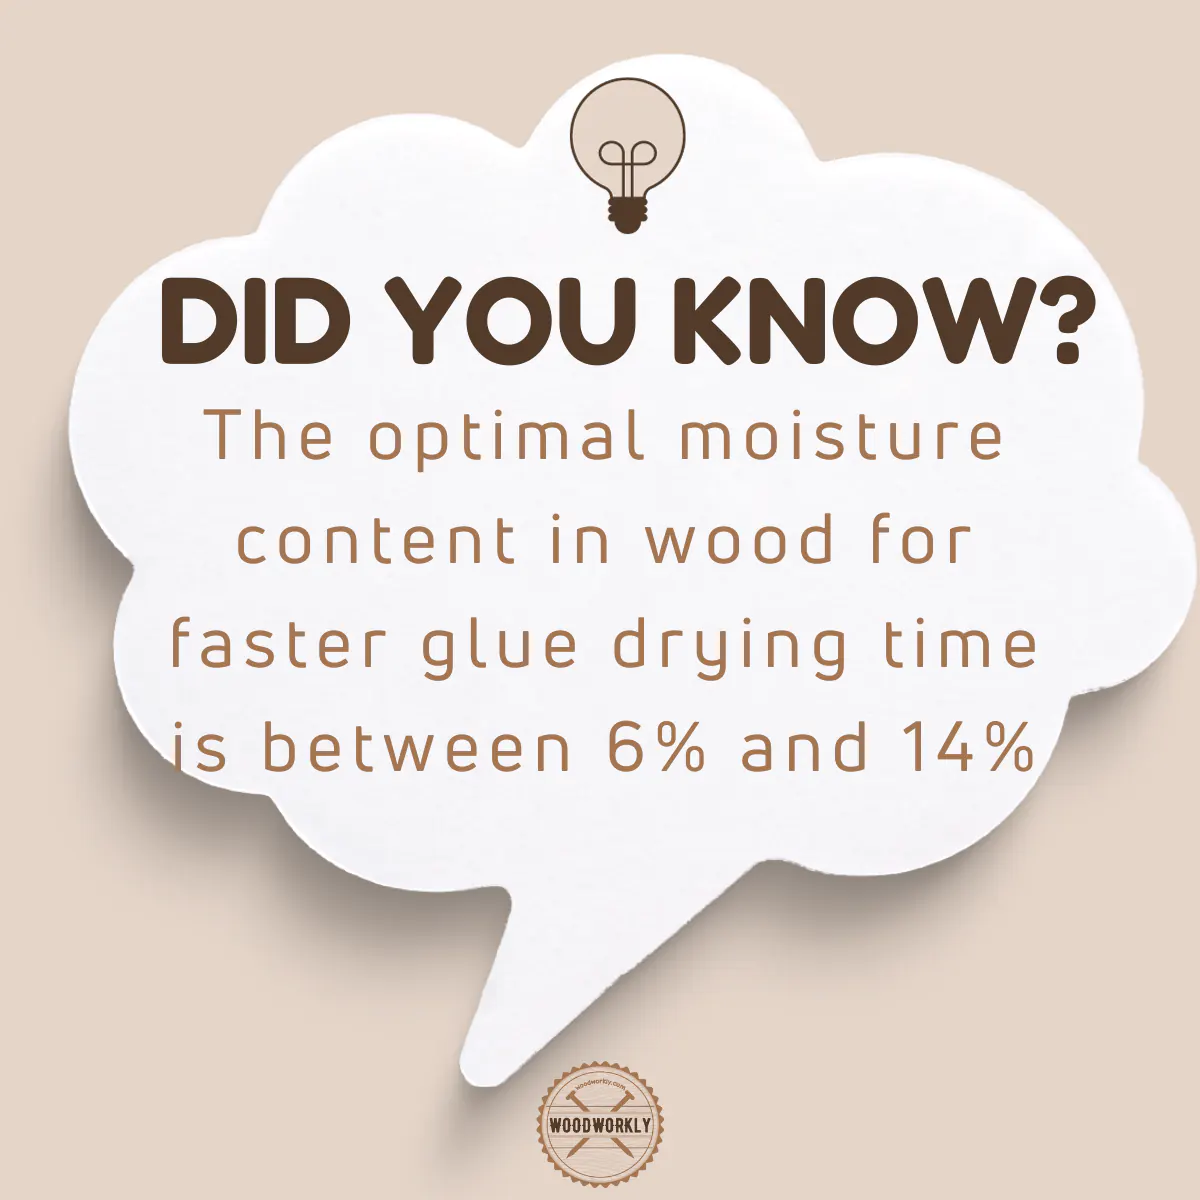 Did you know fact about drying times of wood glue